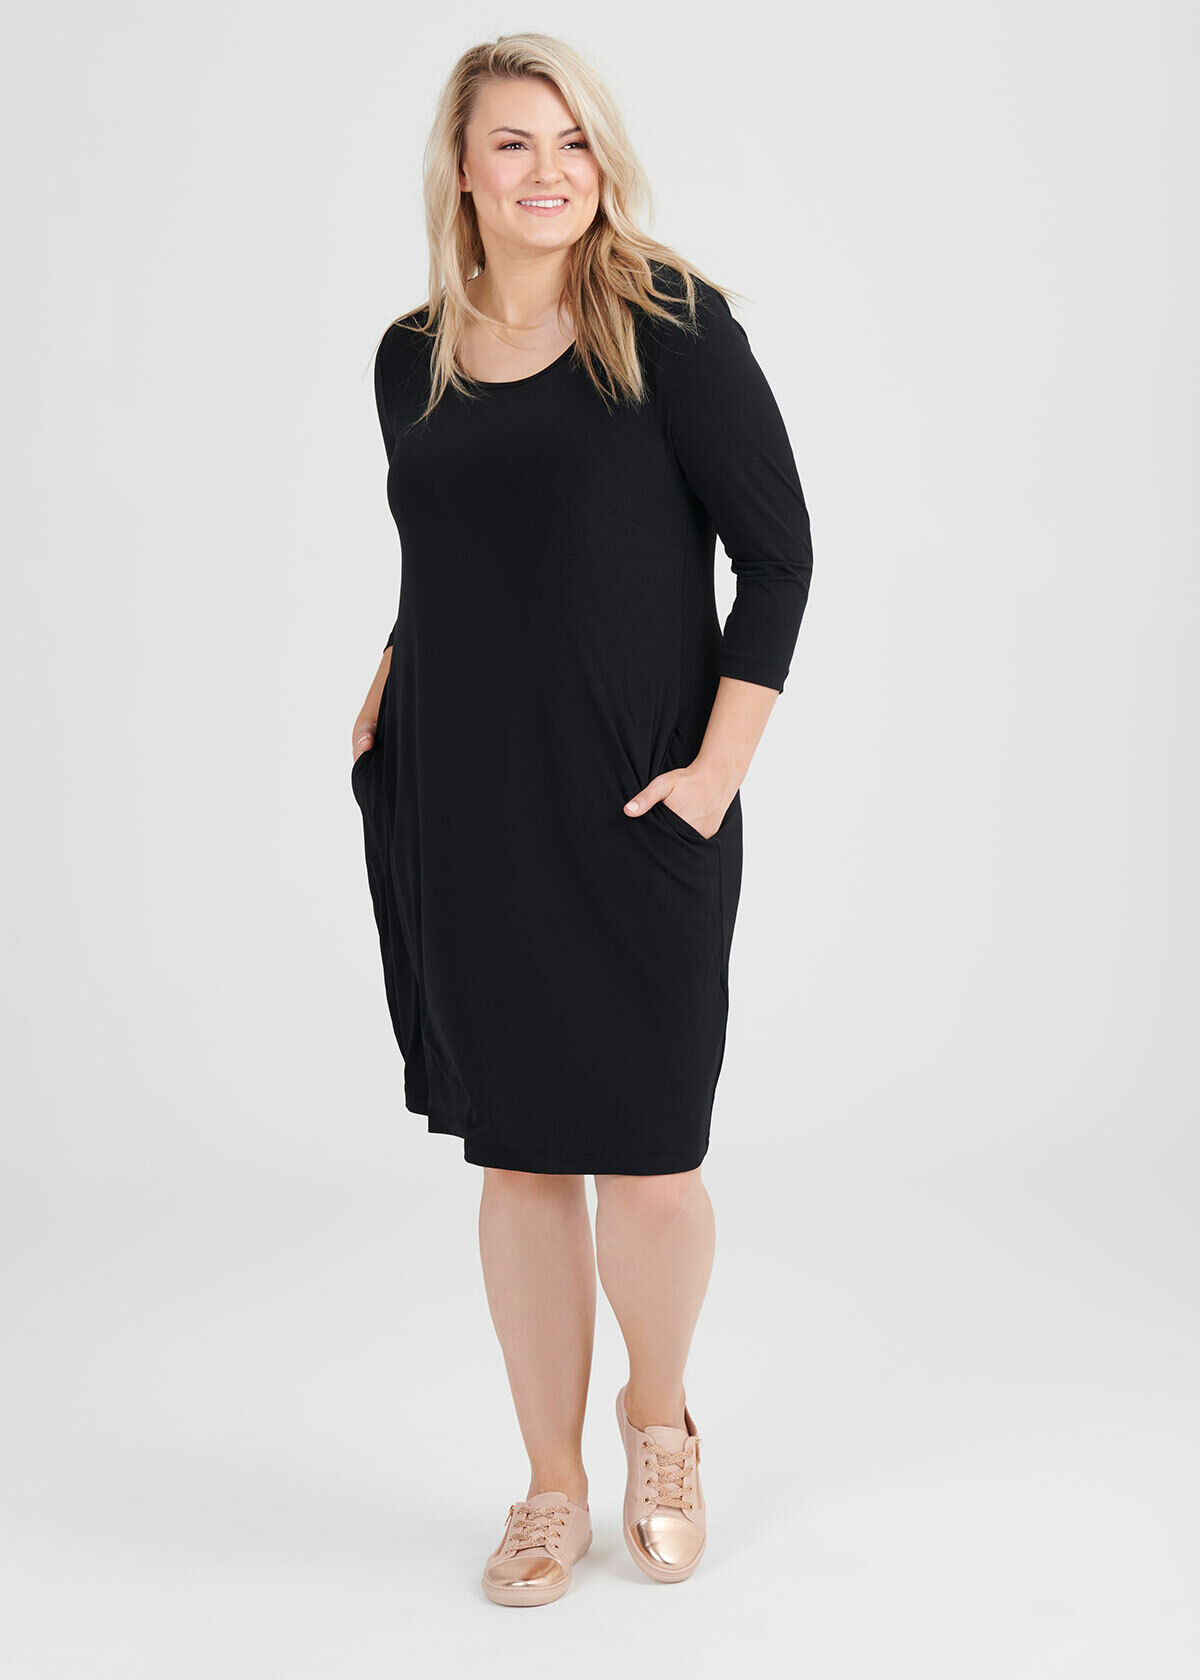 Women's Winter Fashion Style Plus Size Women's Ribbed Dress - The Little  Connection